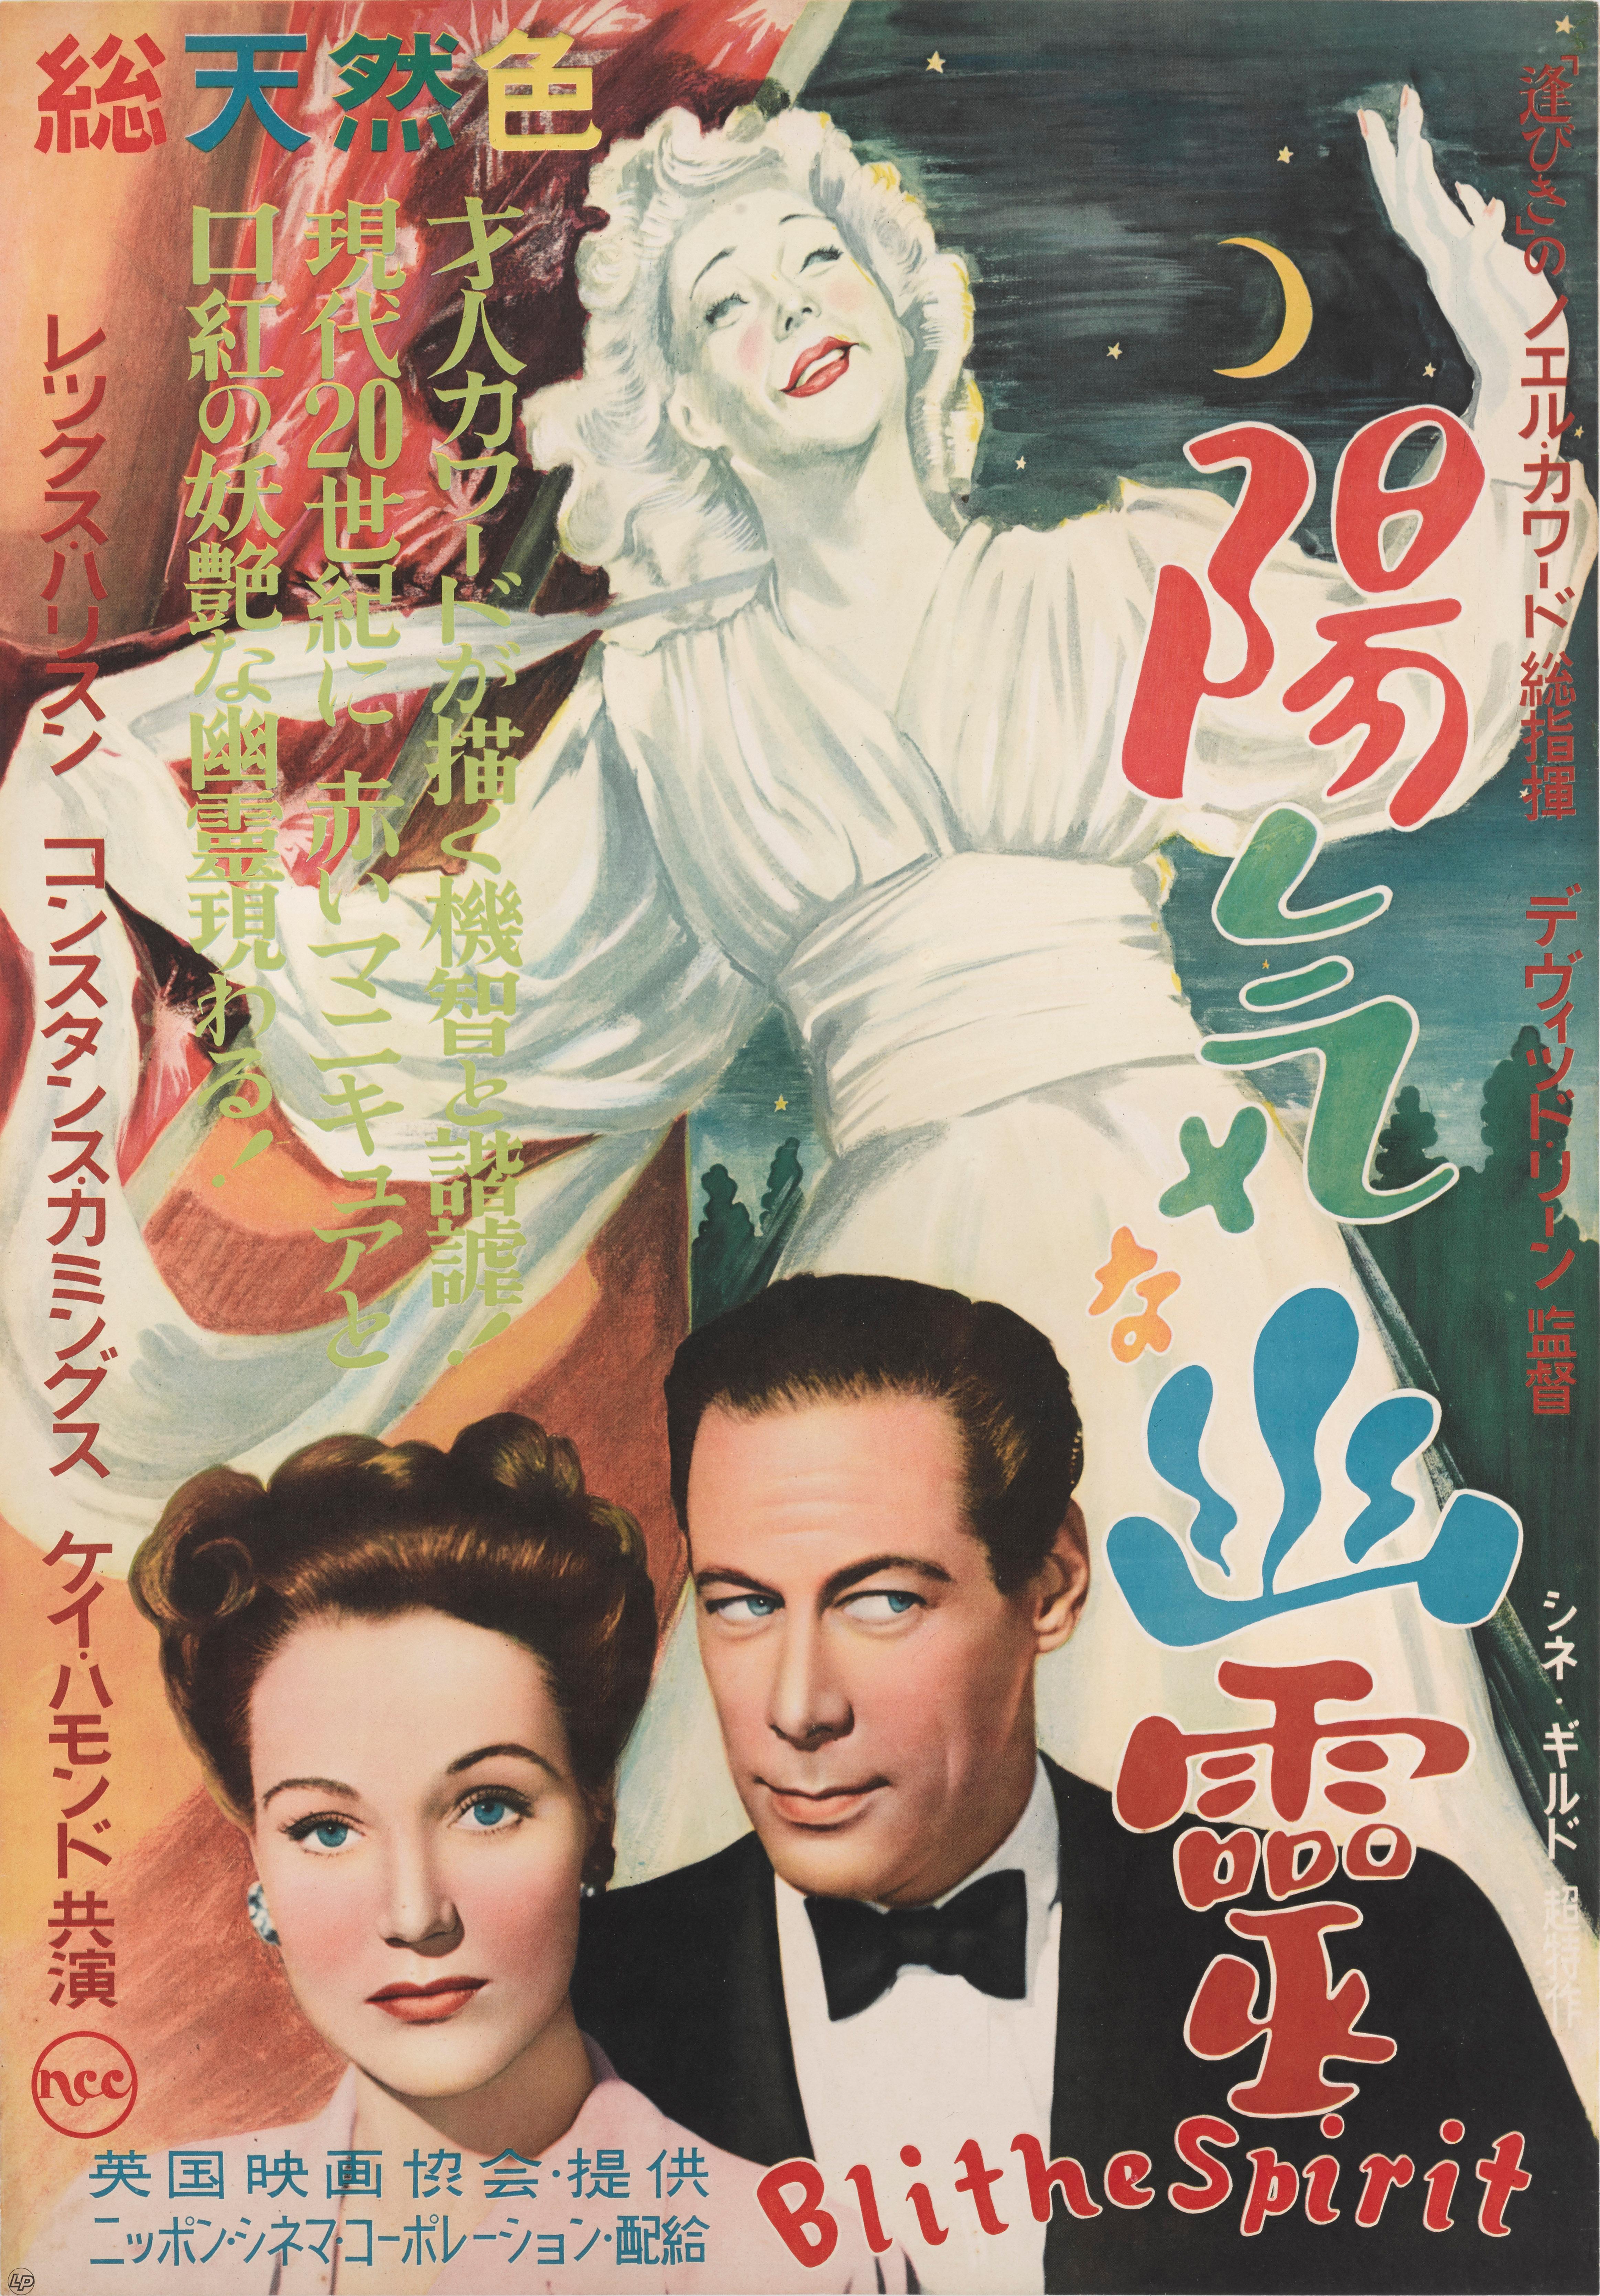 Original Japanese film poster for Davis Lean's 1945 Comedy, Fantasy film starring Rex Harrison, Constance Cummings
This is probable the best looking and most beautiful poster from any country on this title.
This poster was created for the films